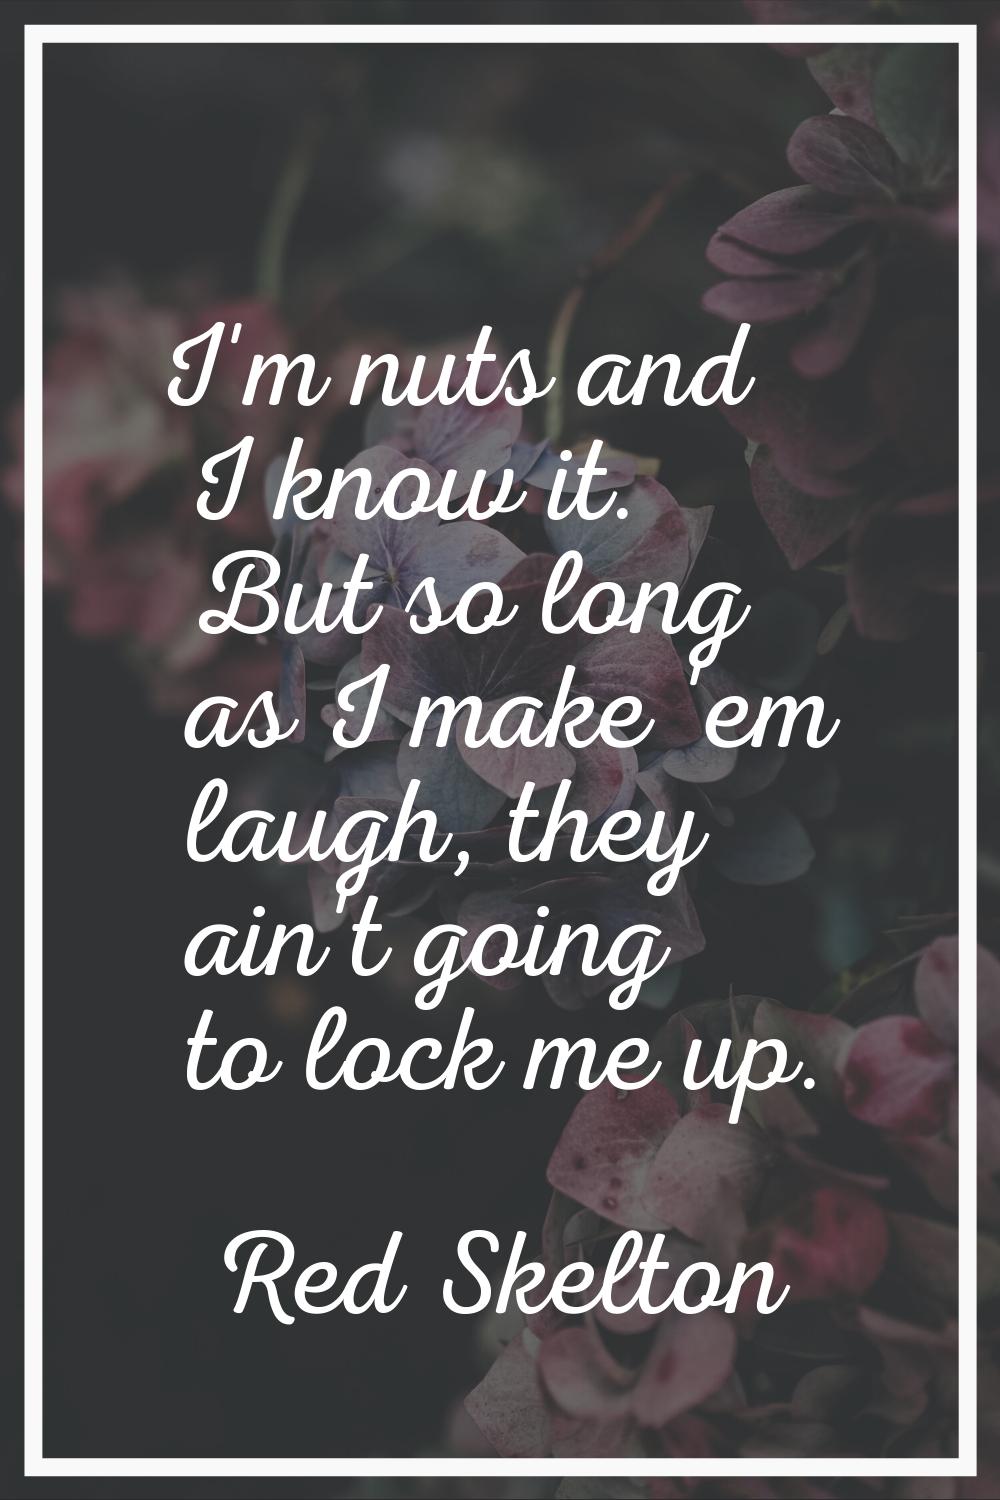 I'm nuts and I know it. But so long as I make 'em laugh, they ain't going to lock me up.